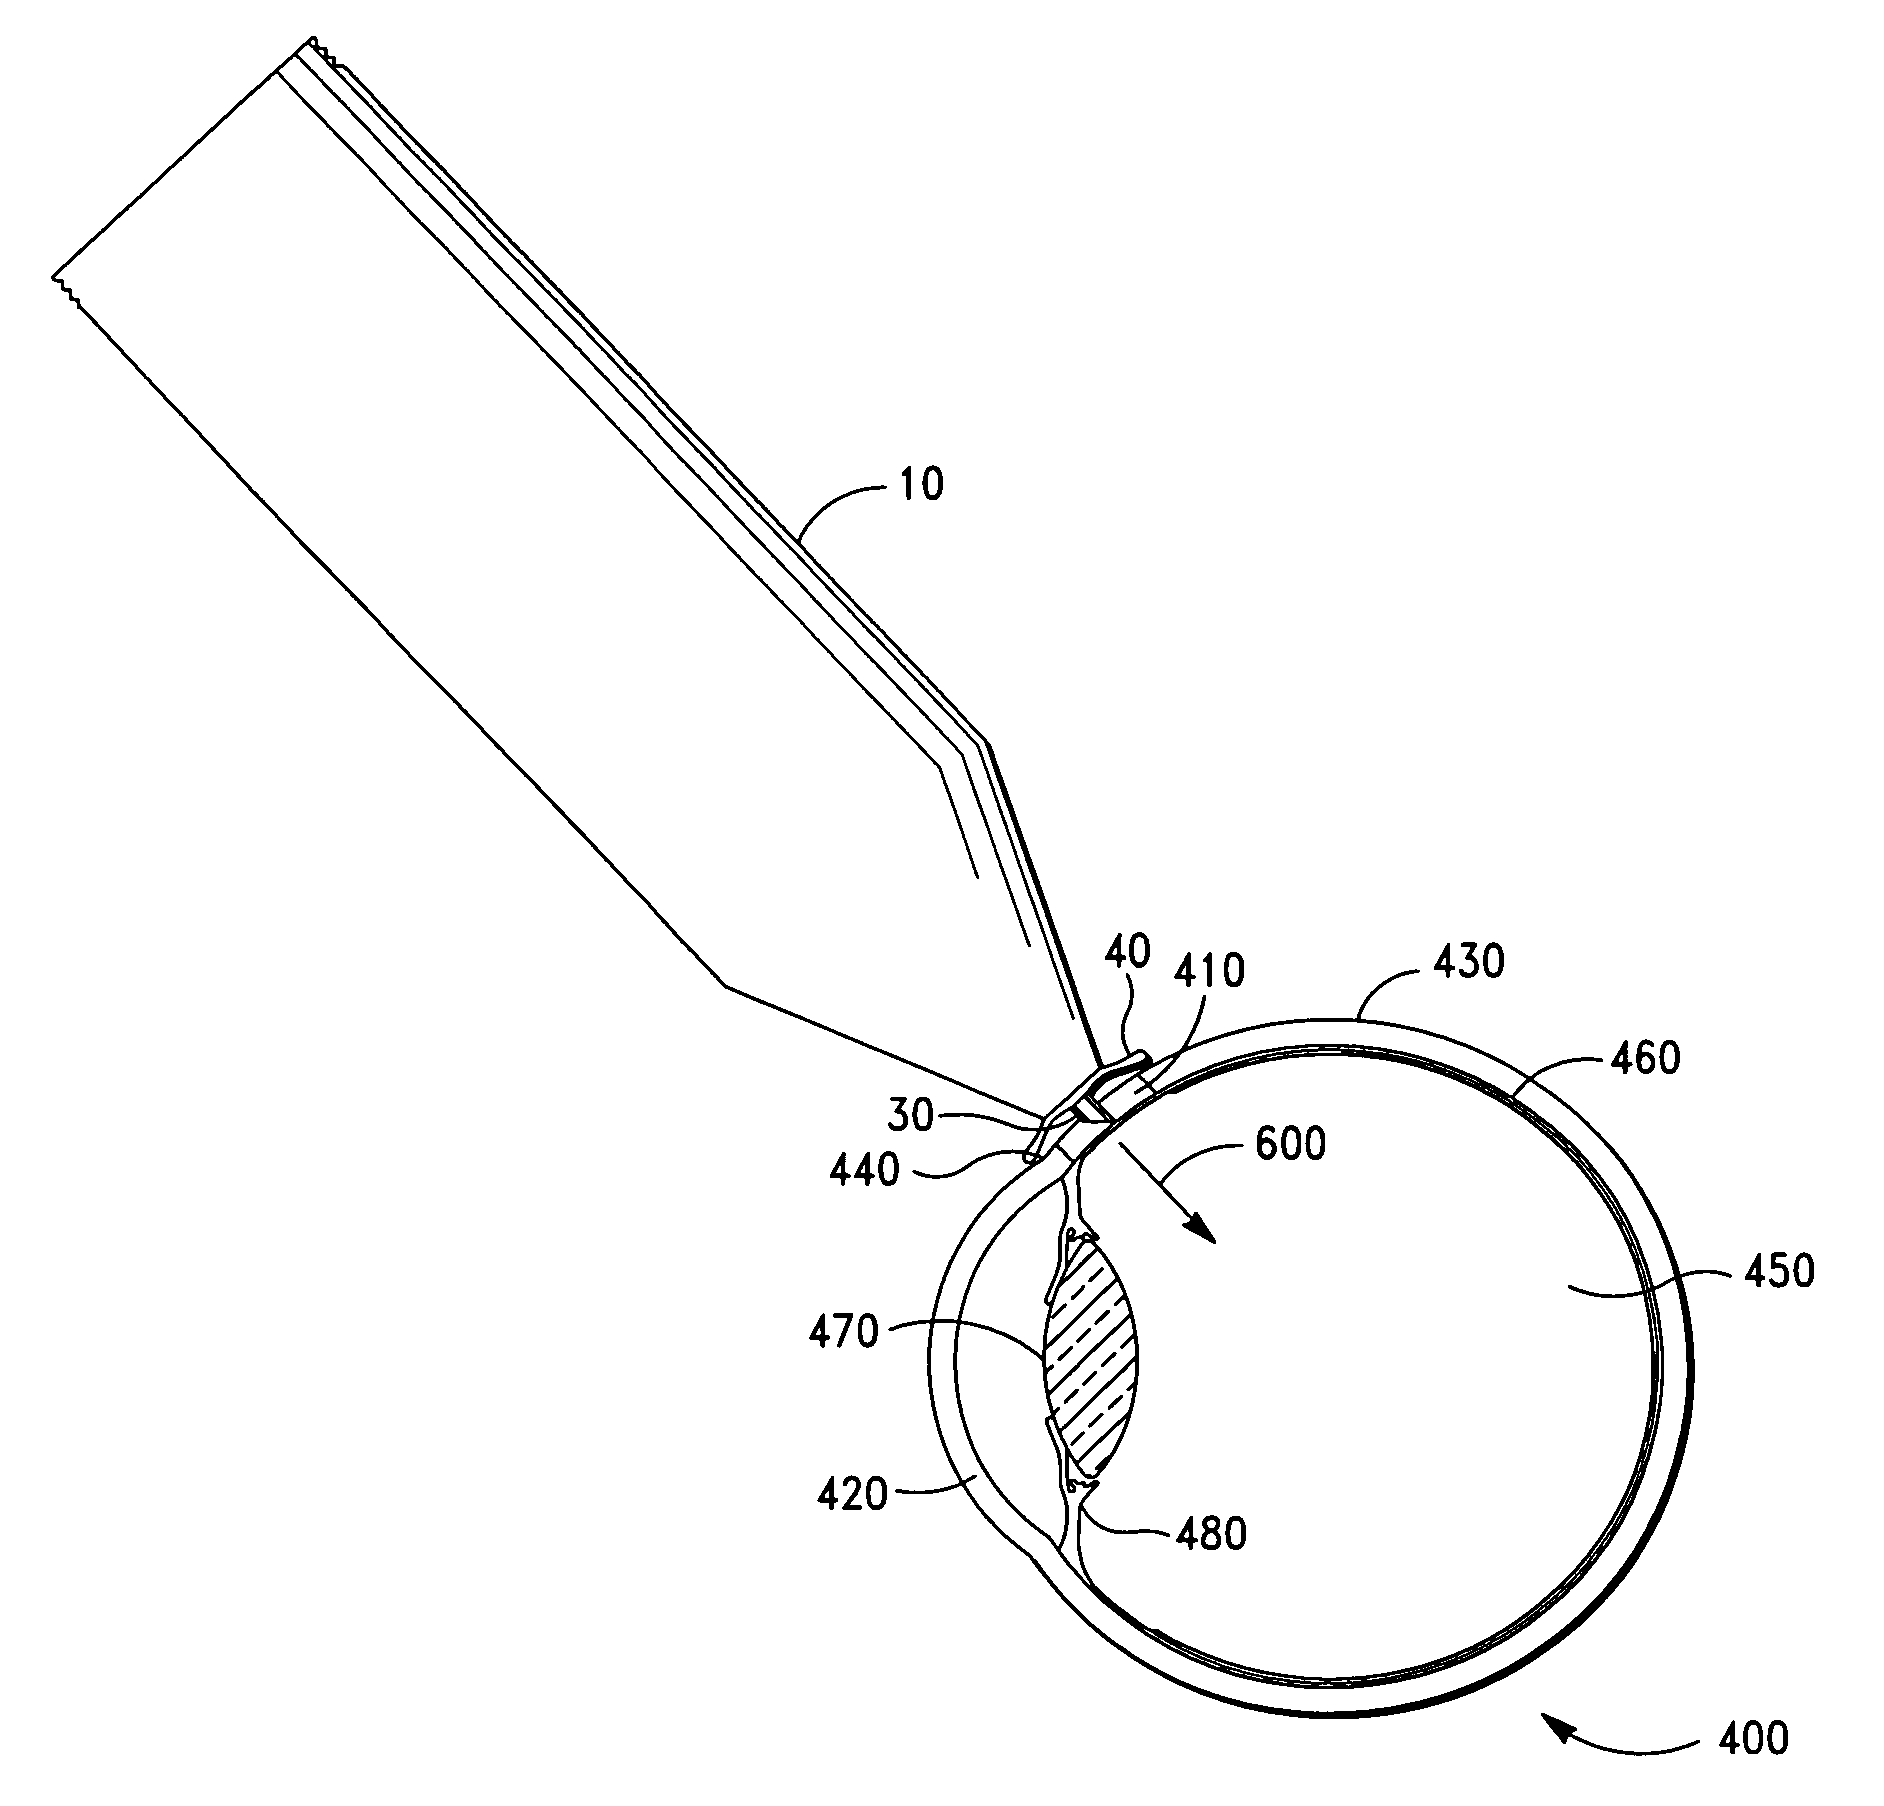 Intravitreal injection device, system and method